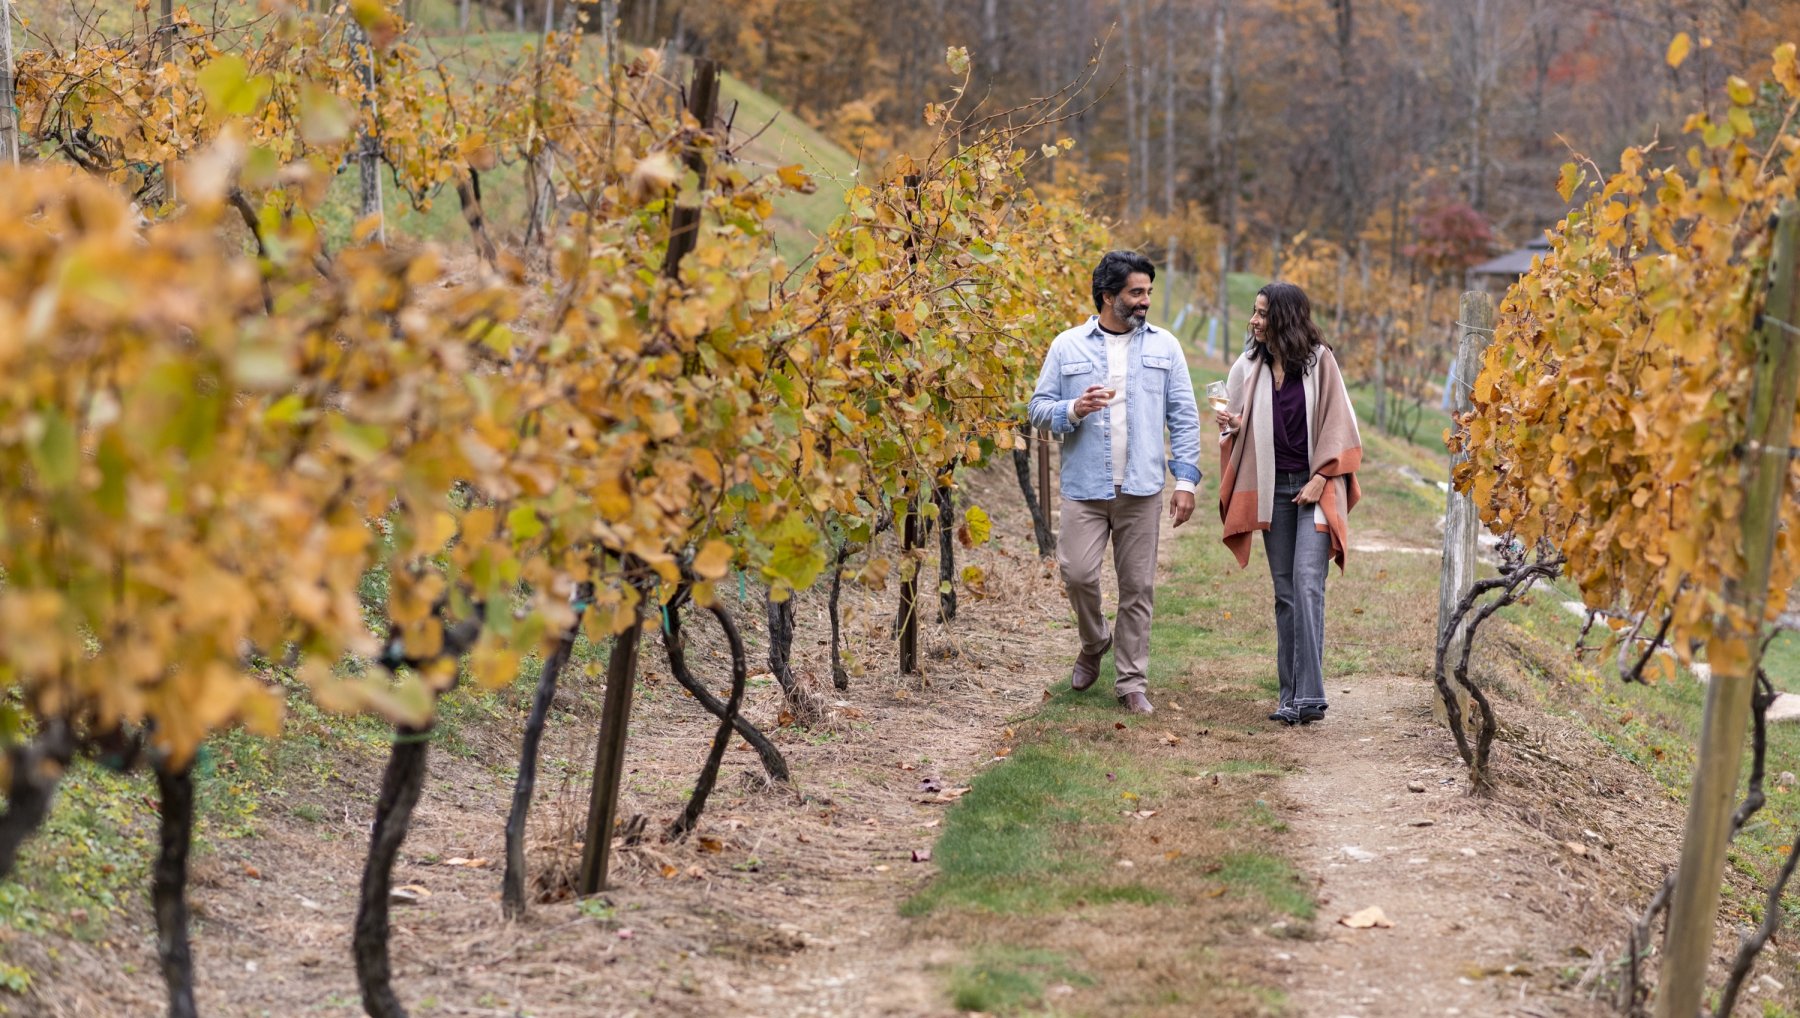 A person and person walking in a vineyard